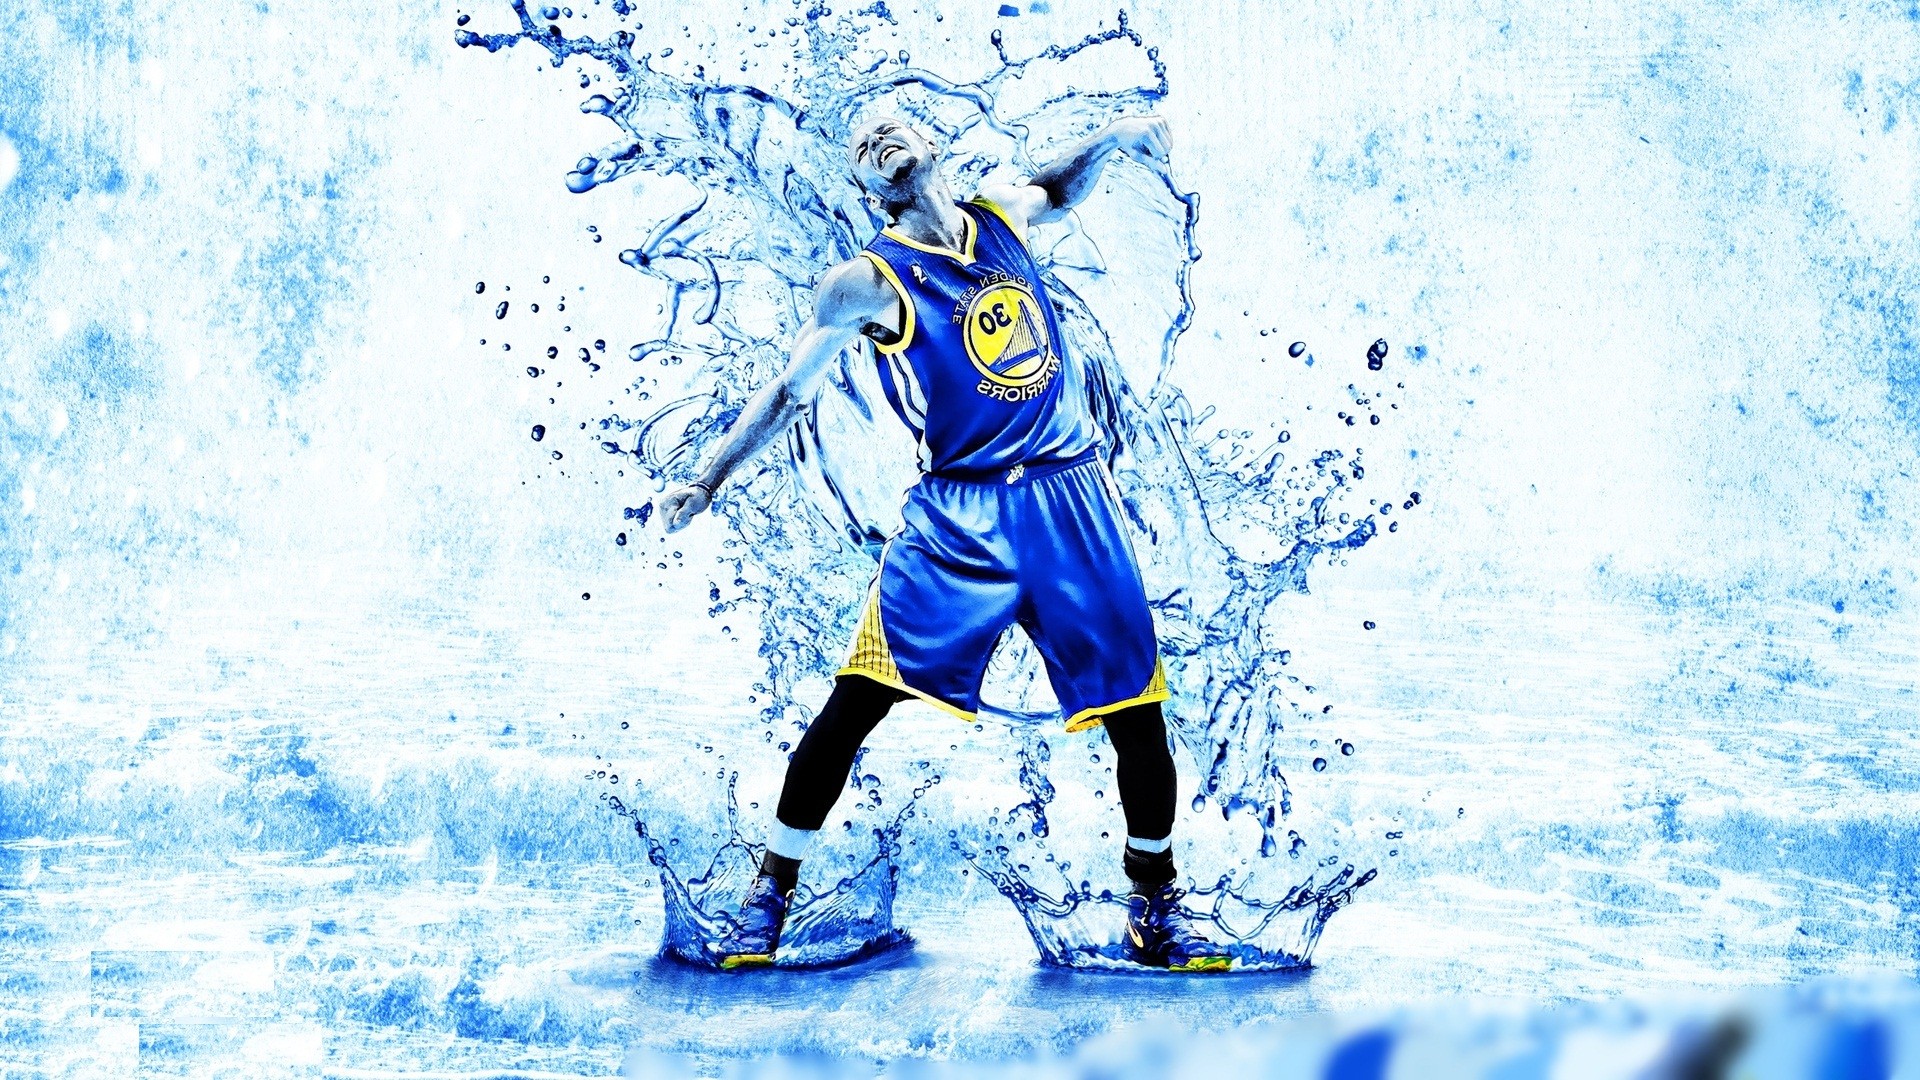 1920x1080 Stephen Curry Wallpaper Free